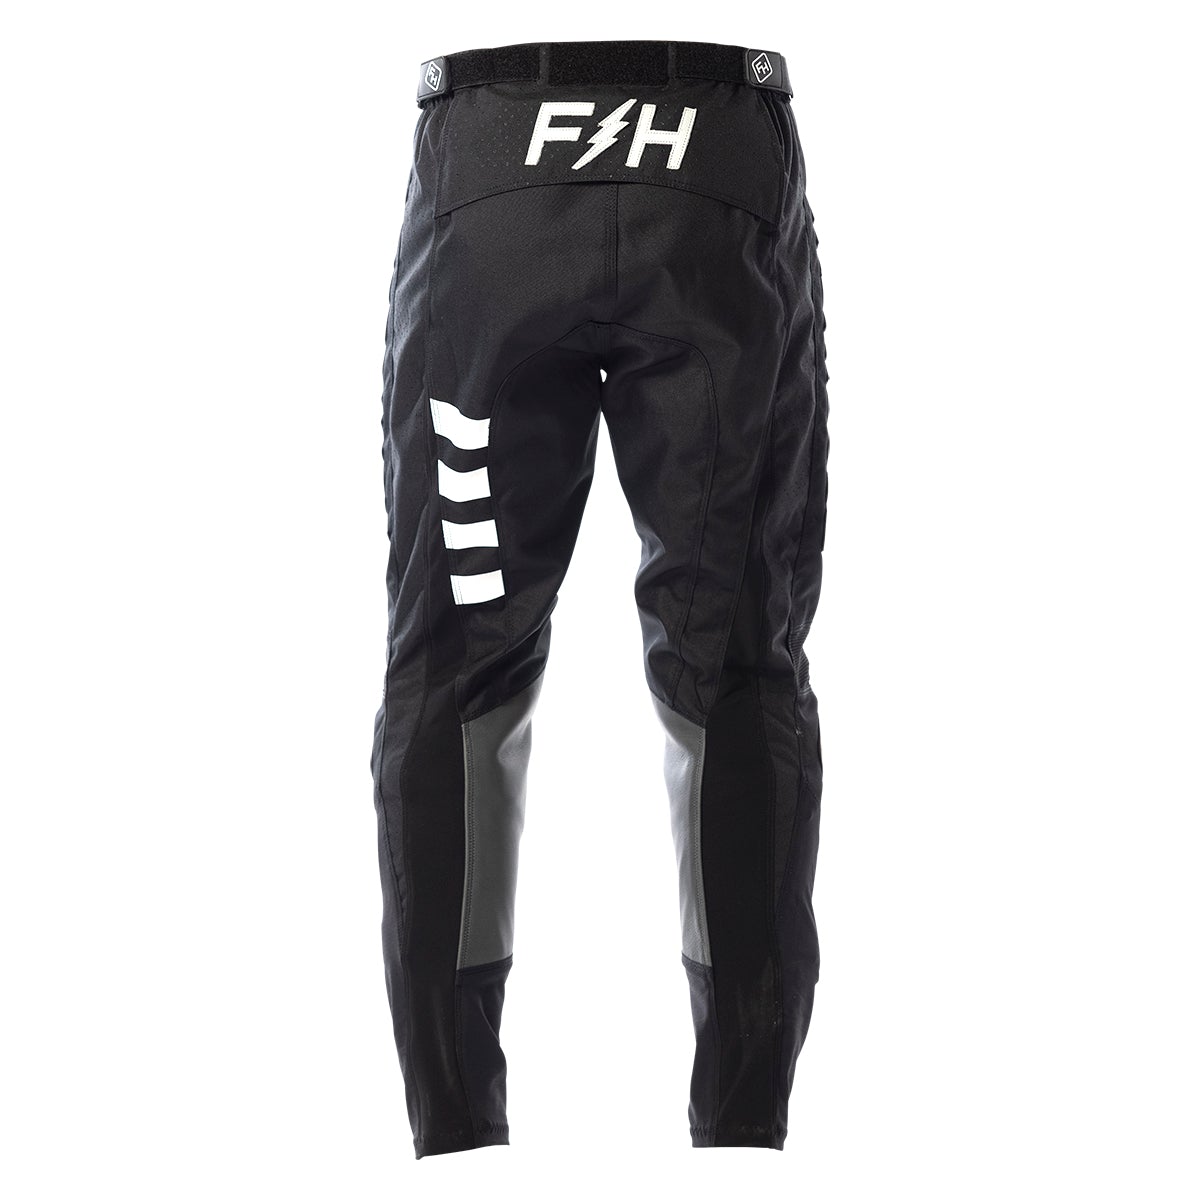 GRINDHOUSE PANT